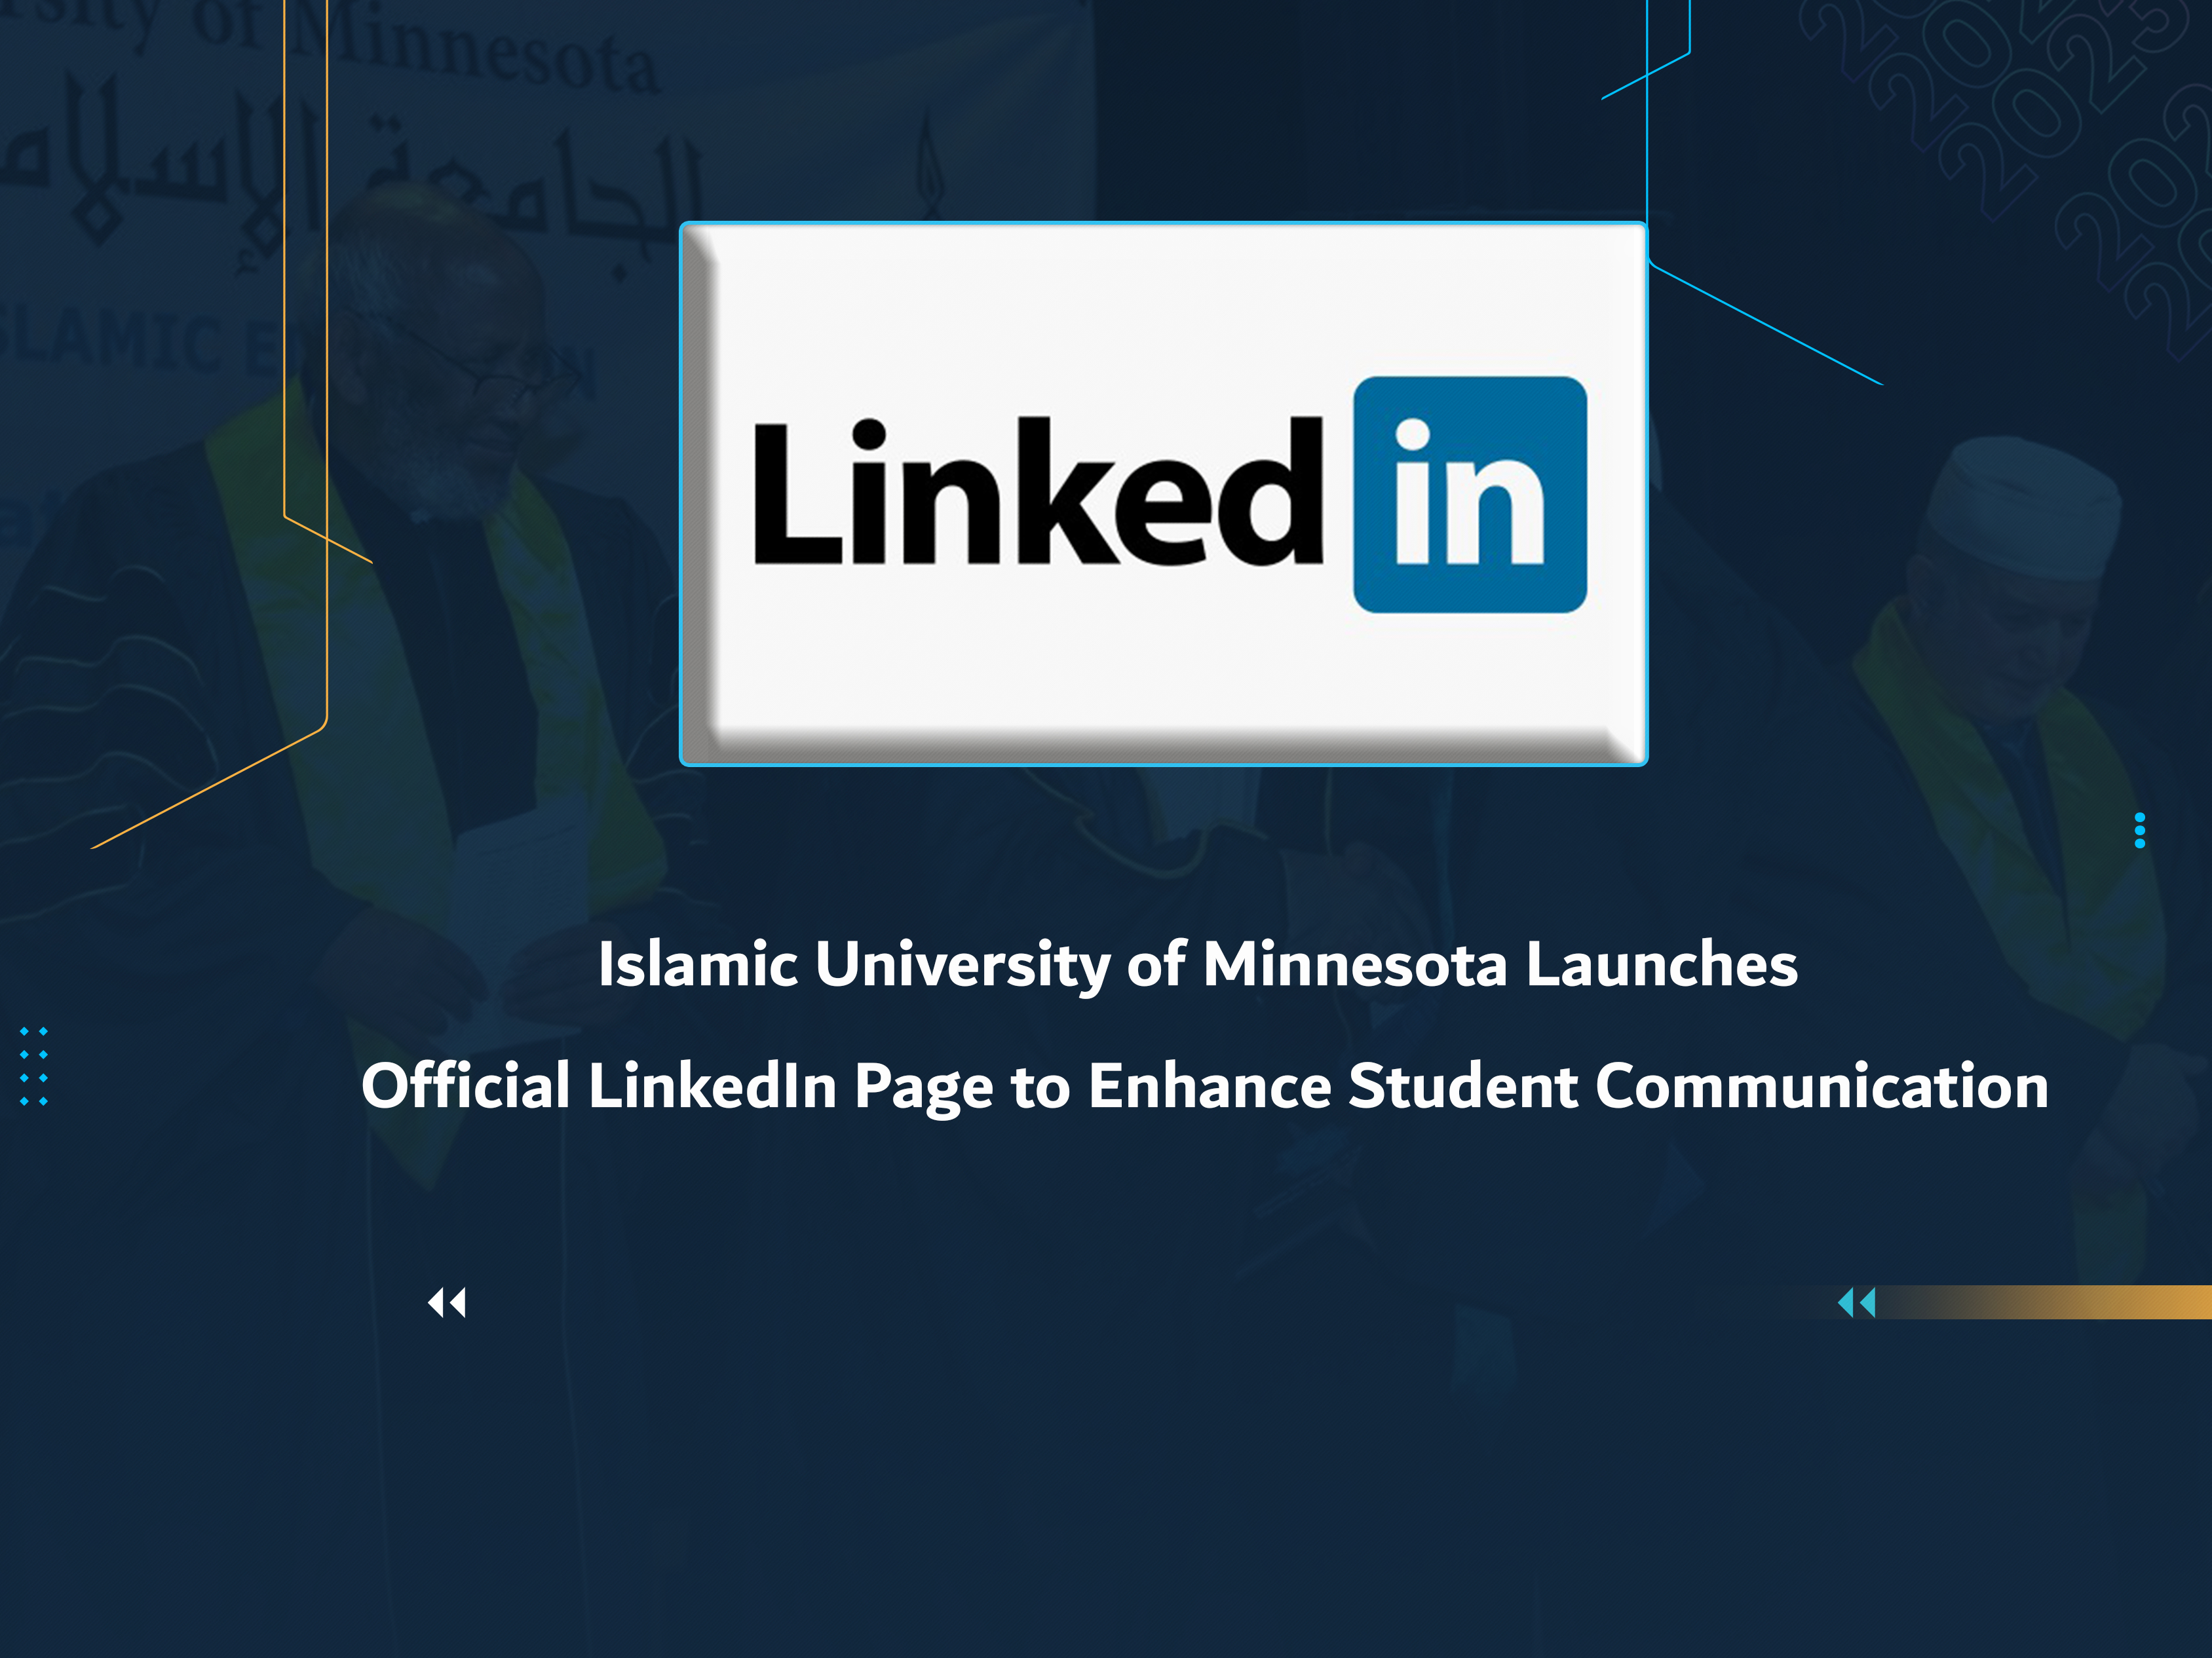 Islamic University of Minnesota Launches Official LinkedIn Page to Enhance Student Communication